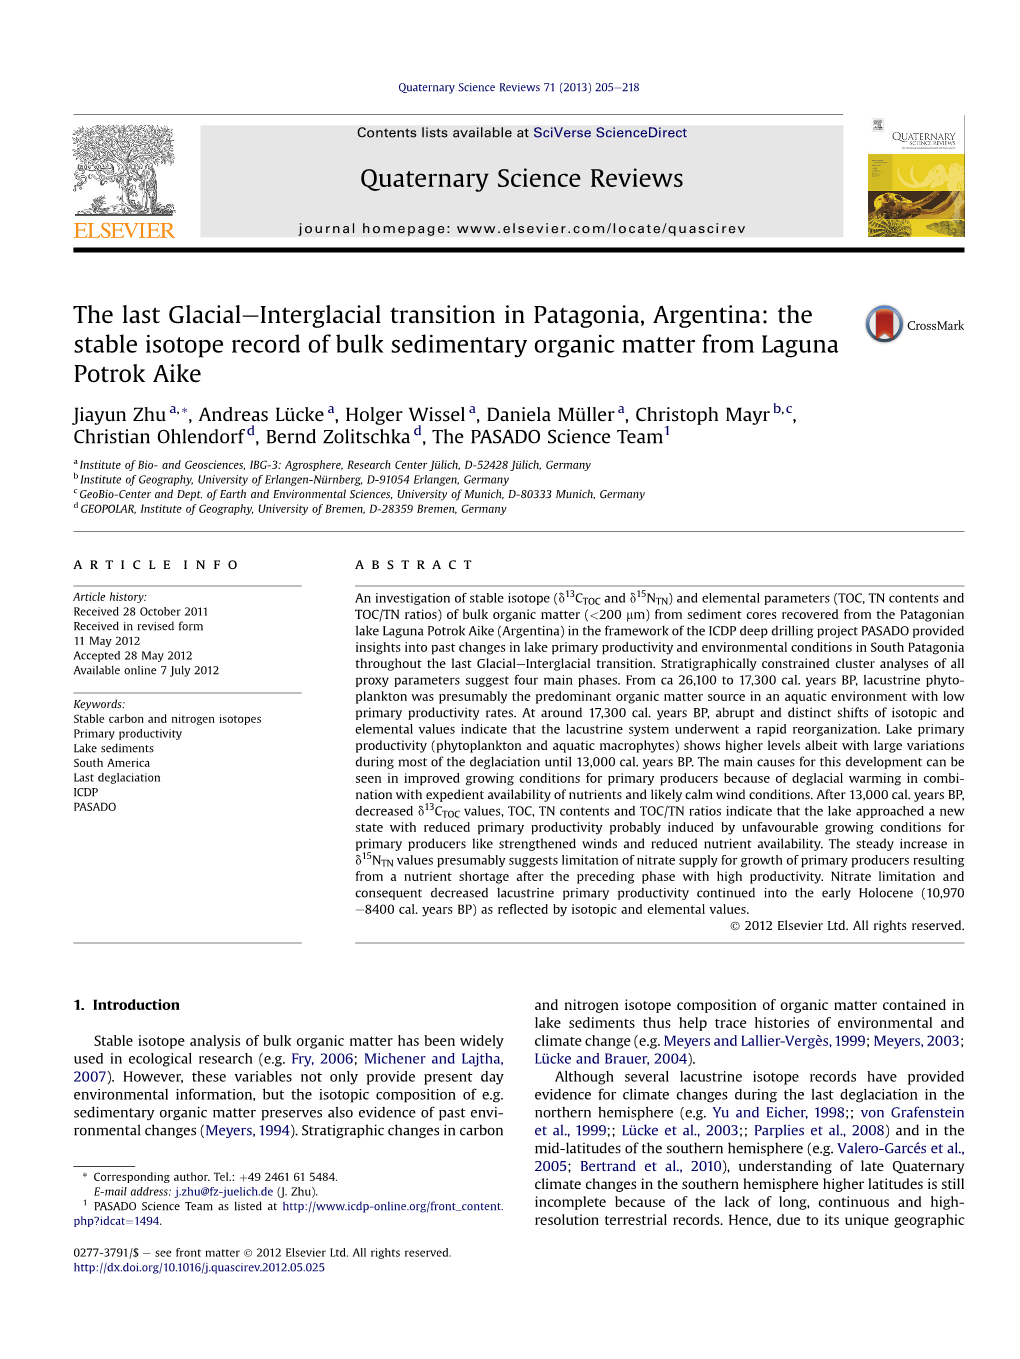 The Stable Isotope Record of Bulk Sedimentary Organic Matter from Laguna Potrok Aike